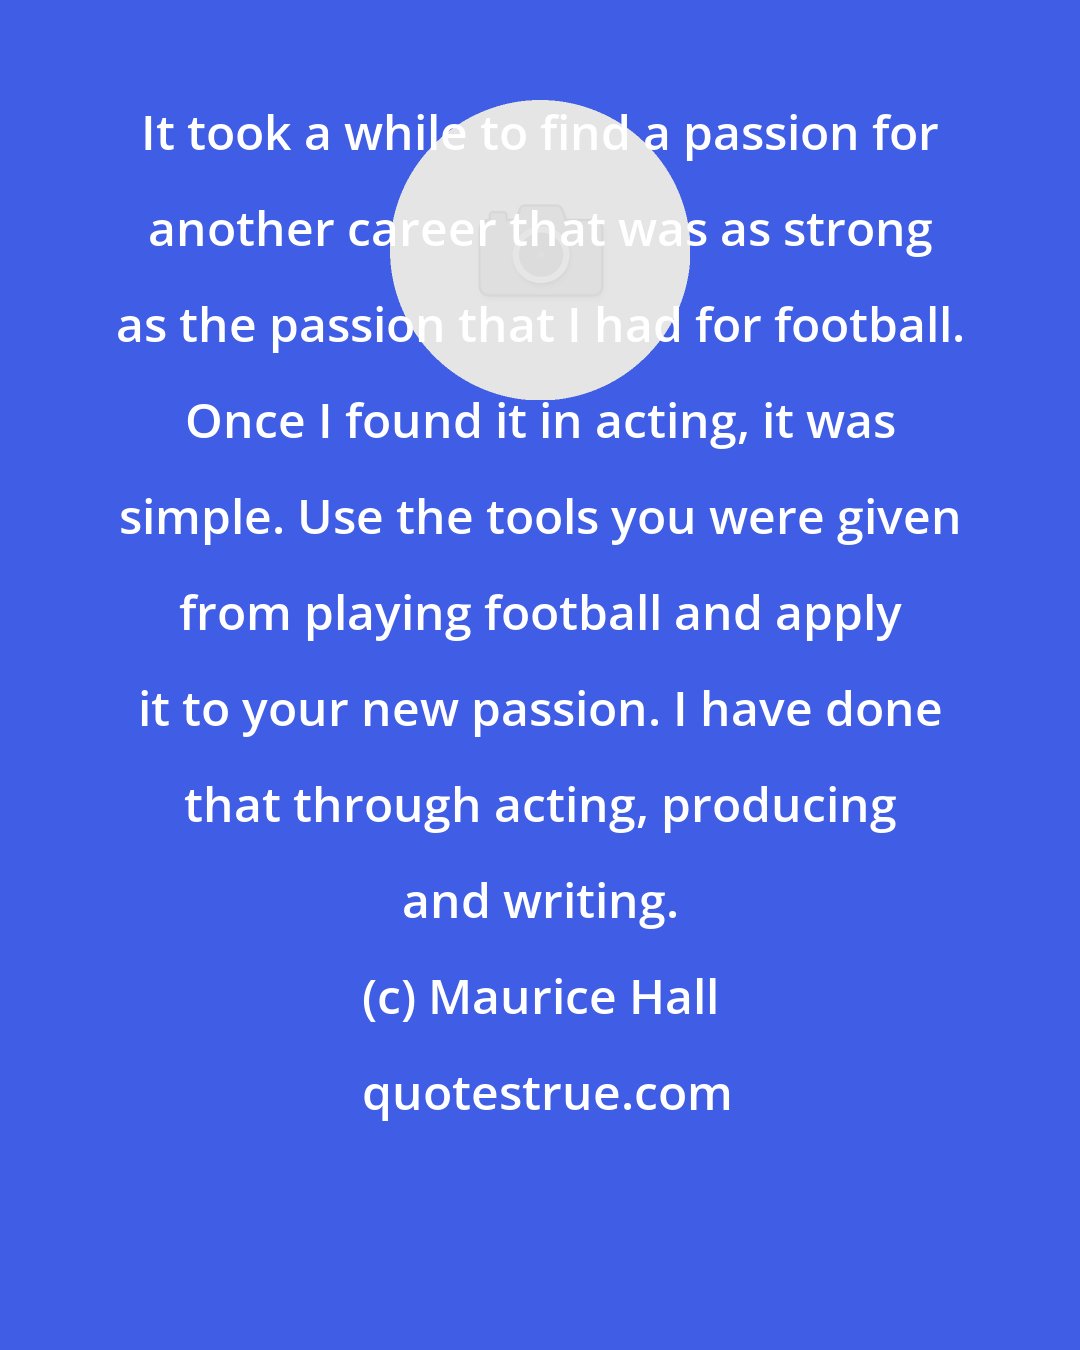 Maurice Hall: It took a while to find a passion for another career that was as strong as the passion that I had for football. Once I found it in acting, it was simple. Use the tools you were given from playing football and apply it to your new passion. I have done that through acting, producing and writing.